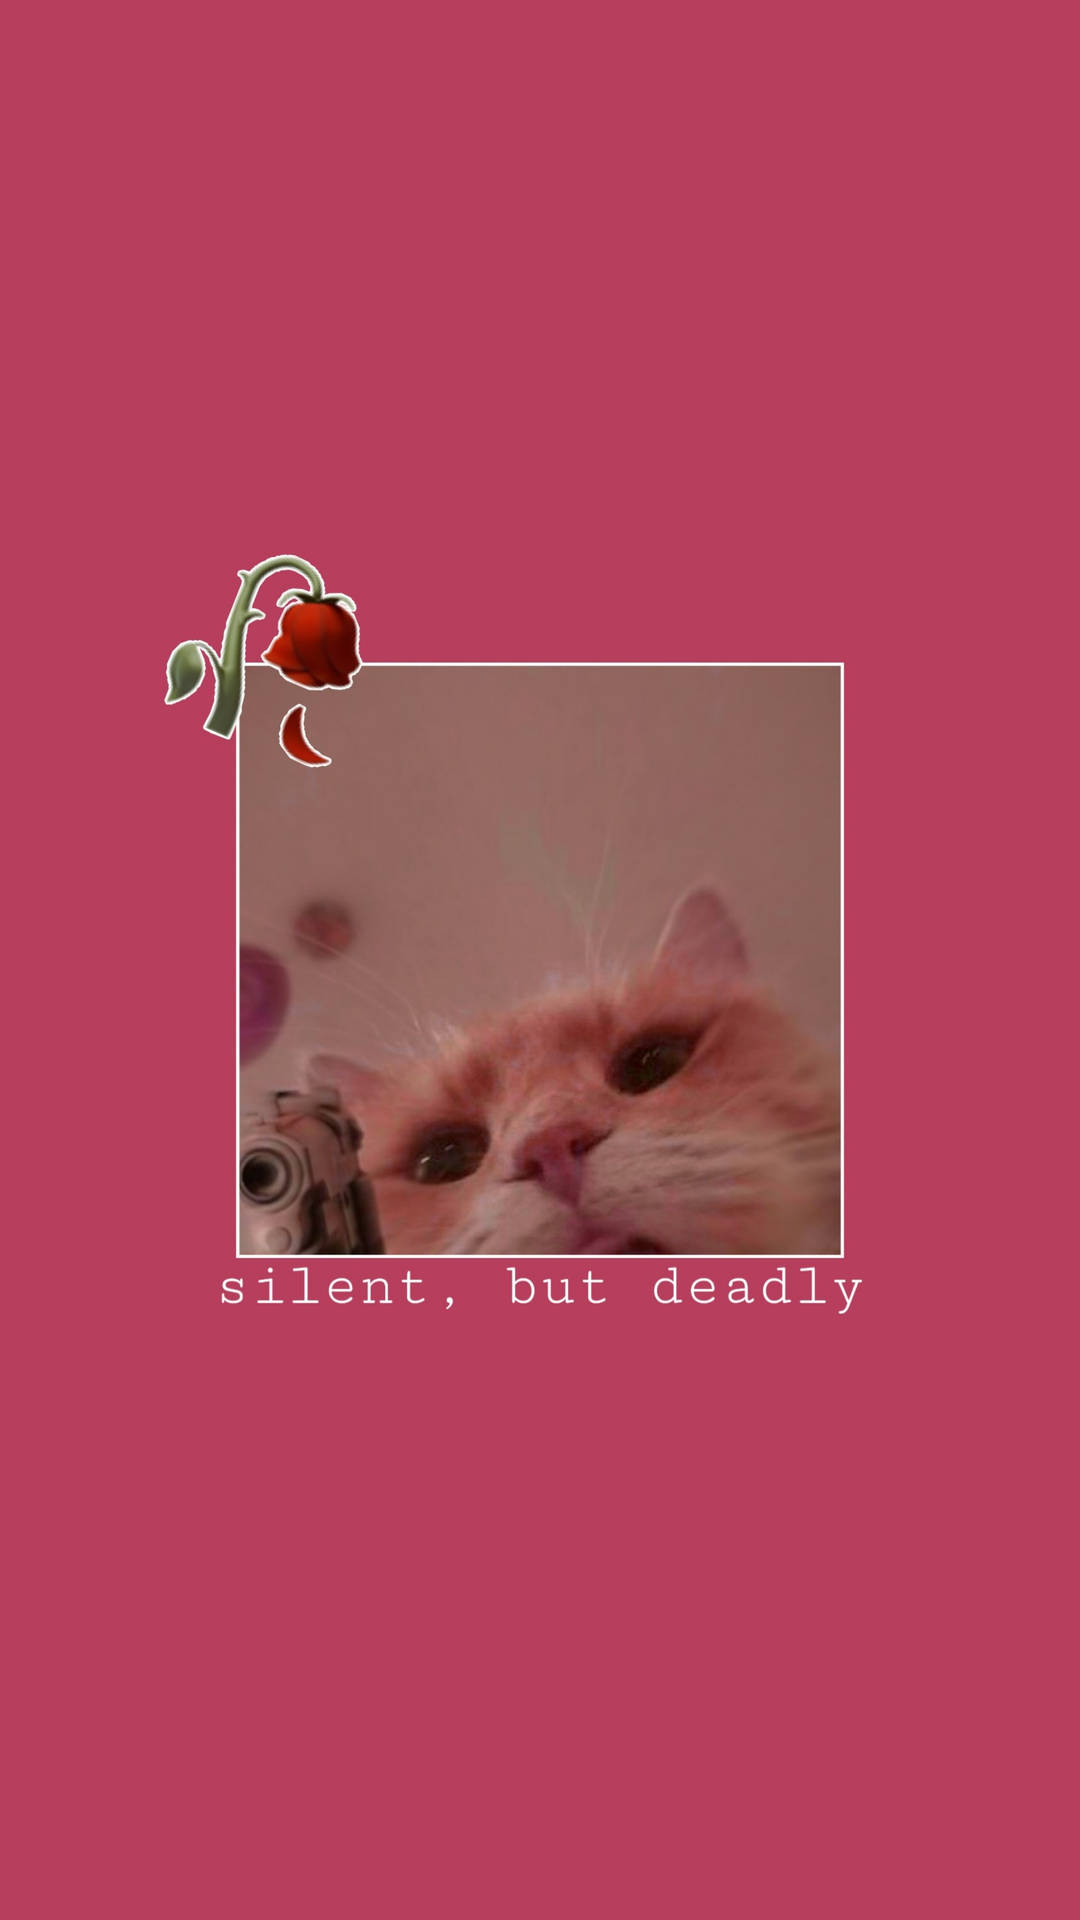 Cute Cat Aesthetic Silent But Lethal Background